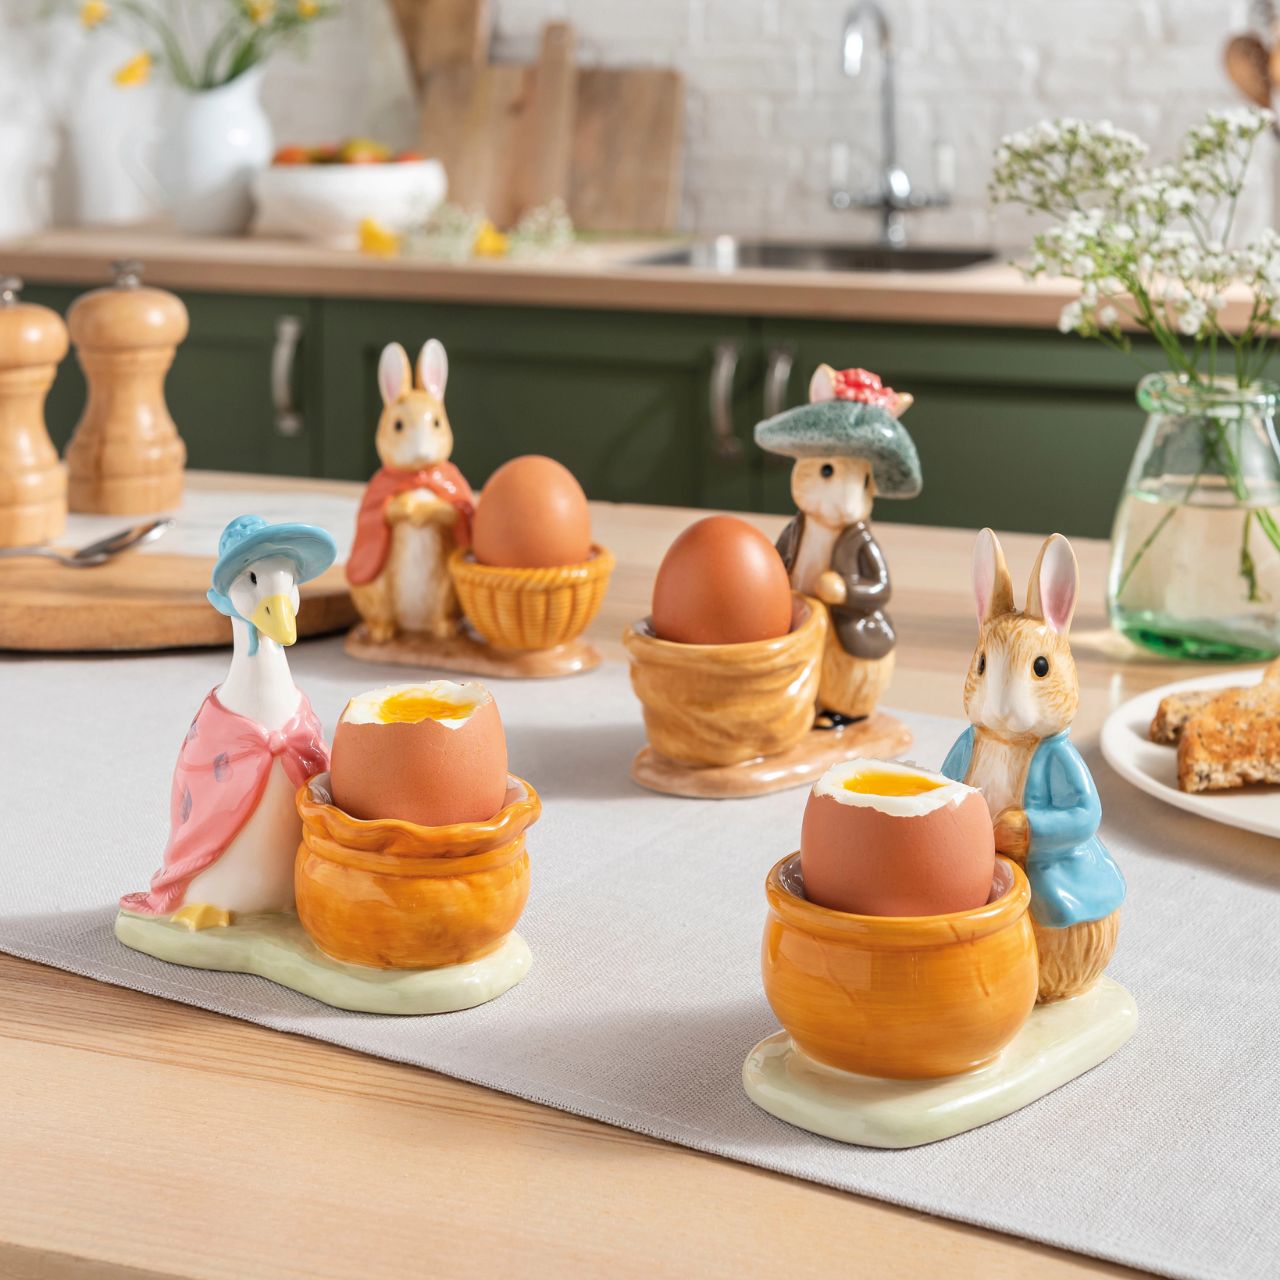 Peter Rabbit Jemima Puddle-Duck Egg Cup  Serve your morning eggs in style with our unique and charming Jemima Puddle-duck egg cup, because regular egg cups aren't all they're cracked up to be... This beautiful Beatrix Potter egg cup has been made from sturdy ceramic and makes the ideal collector's piece or gift.